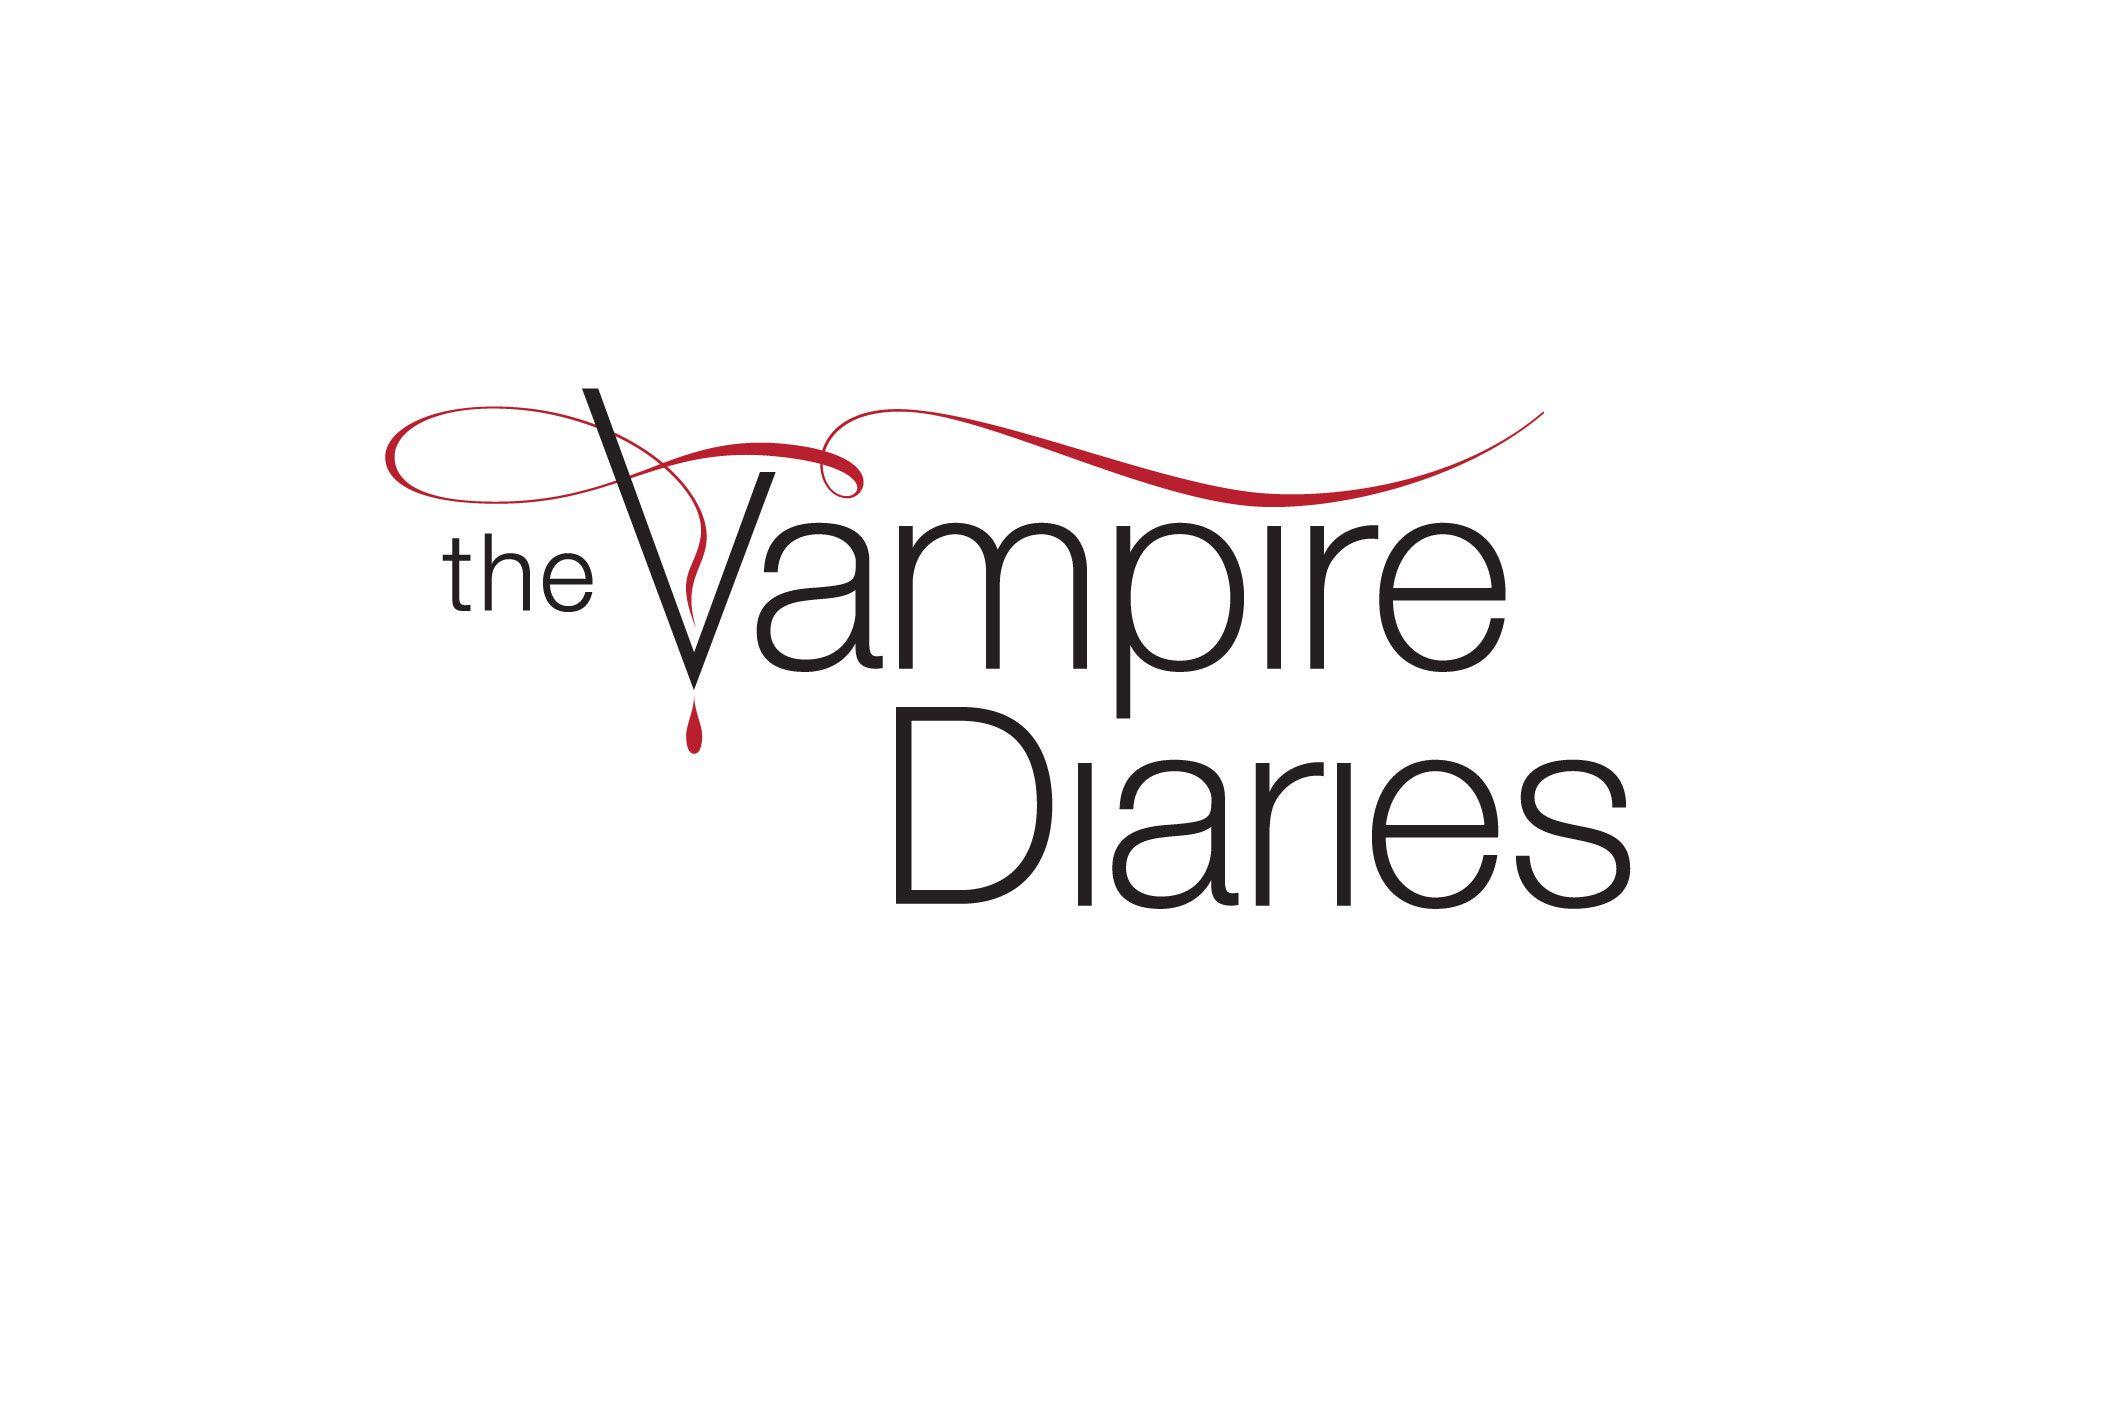 The Vampire Diares Logo - The Vampire Diaries | by Chase Design Group | The vampire diaries ^_ ...